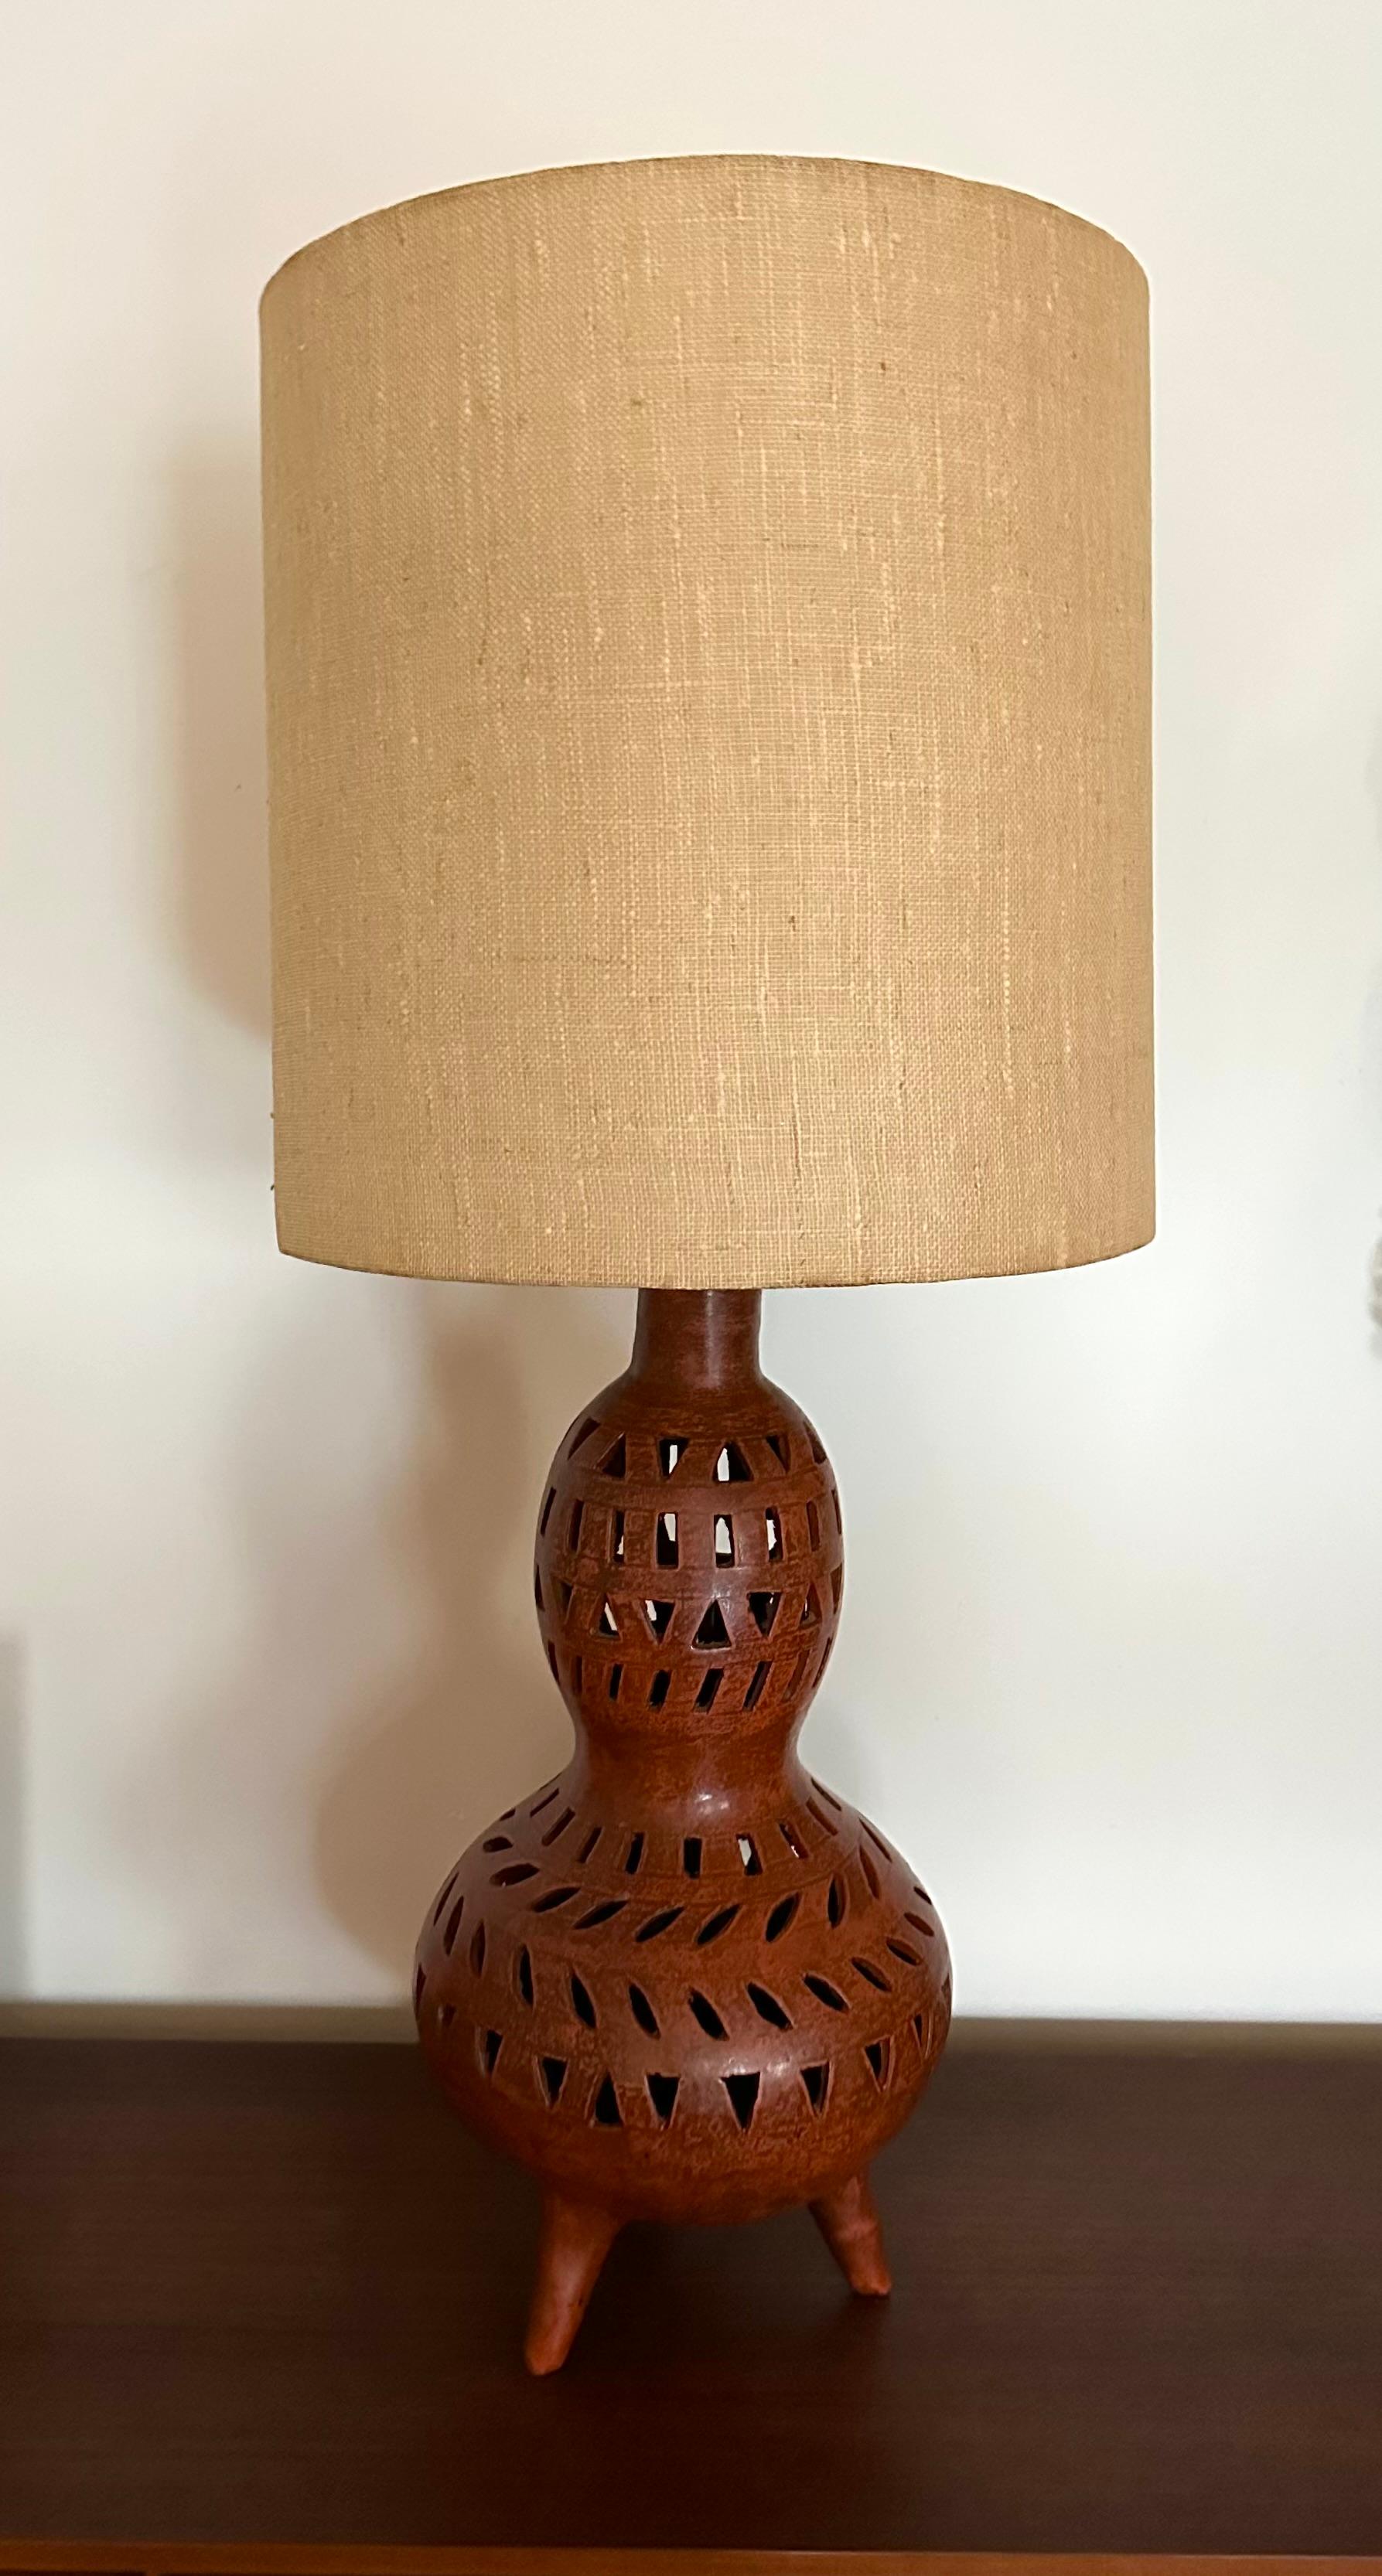 Large sculptural organic modern table lamp. The hand built gourd-shaped body decorated with cutout designs.  The pottery base measures 23